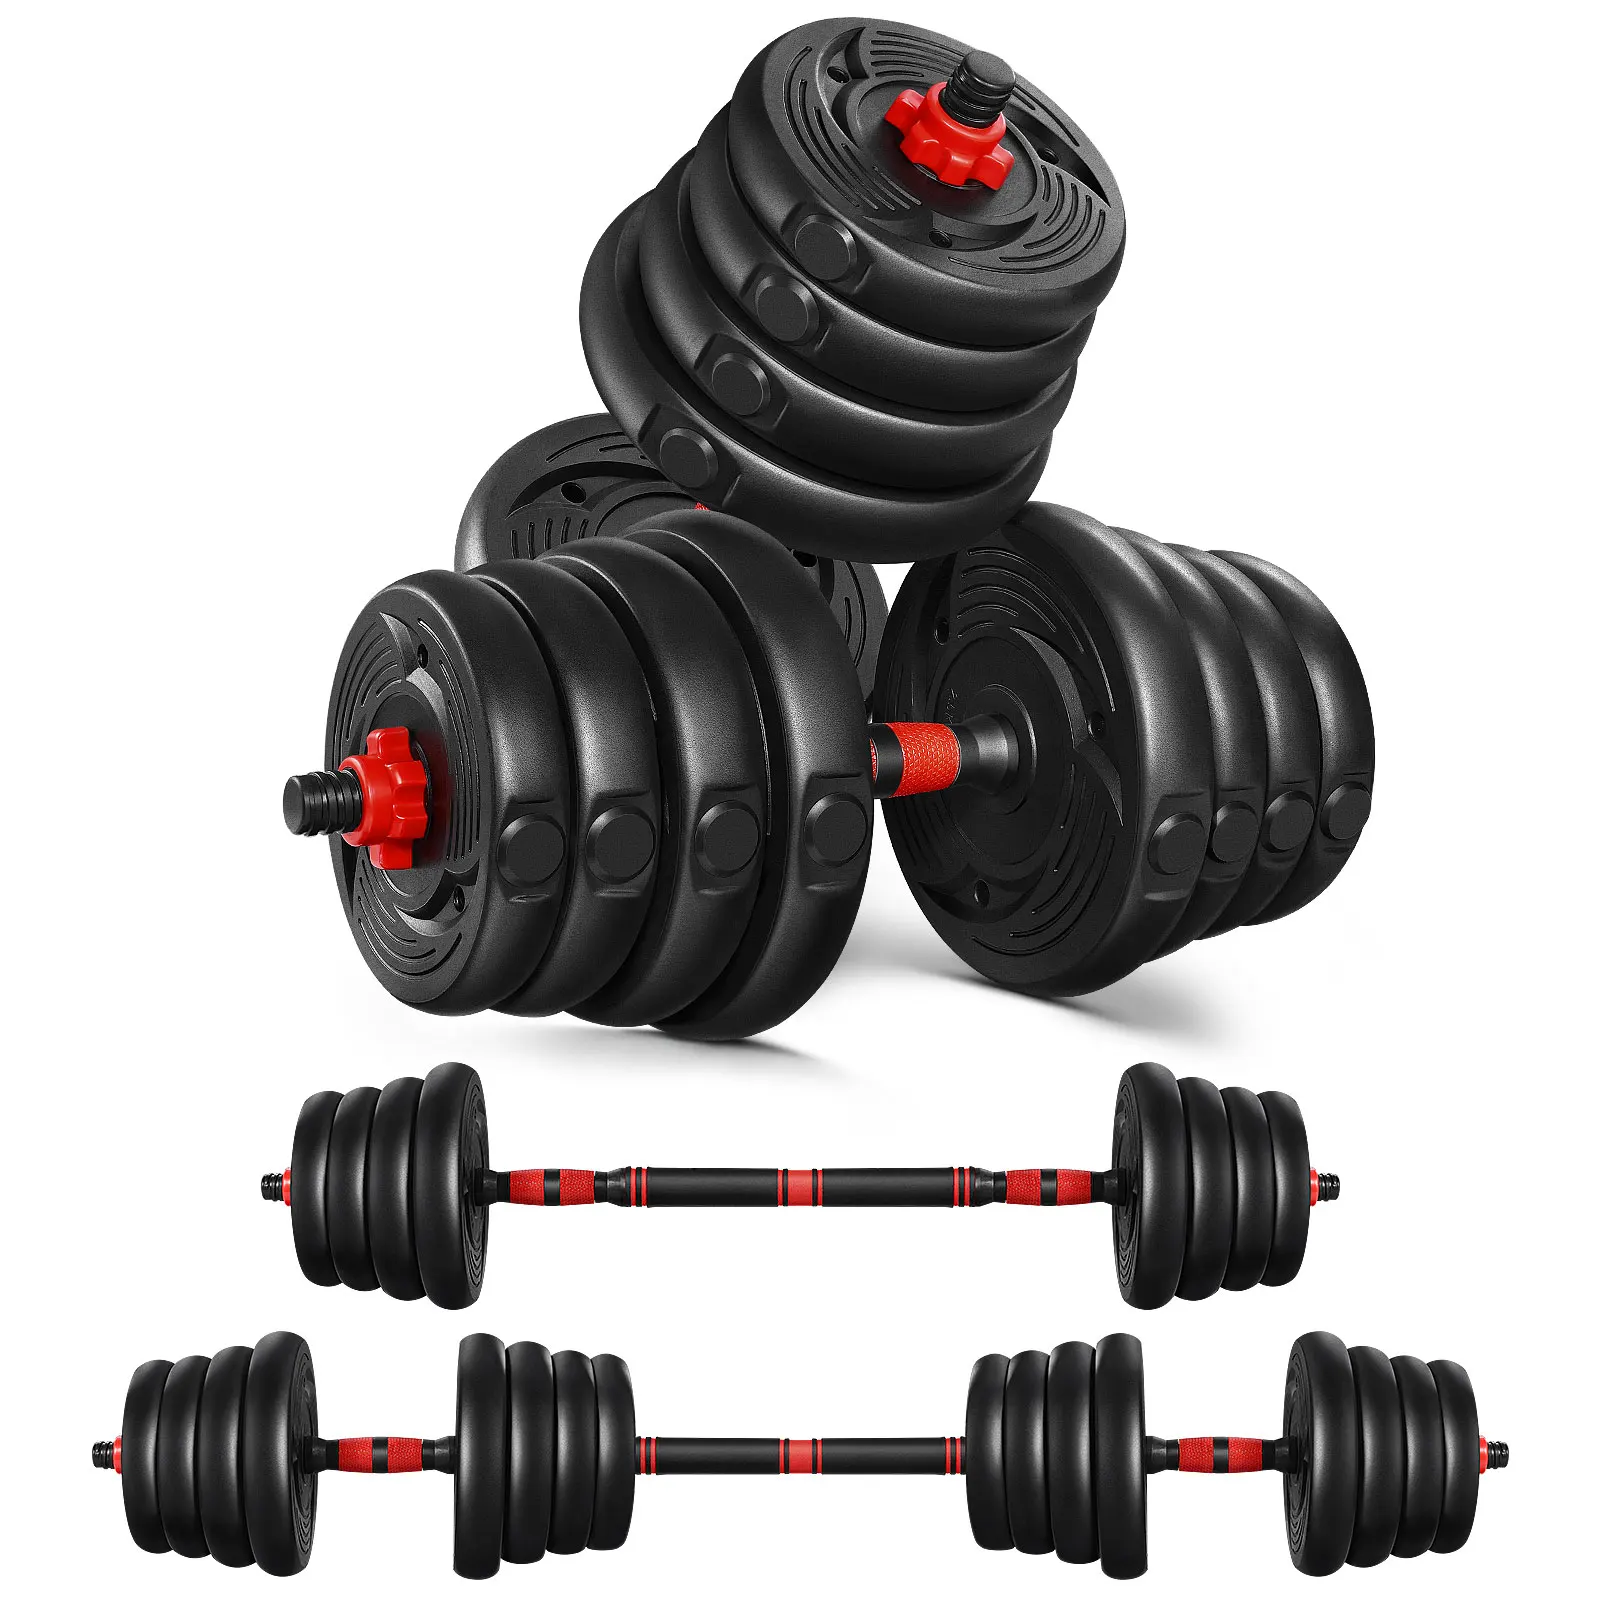 

Adjustable Weights Dumbbells Barbell Set Home Fitness Weight Dumbbells Set Gym Workout Exercise Training With Connecting Rod